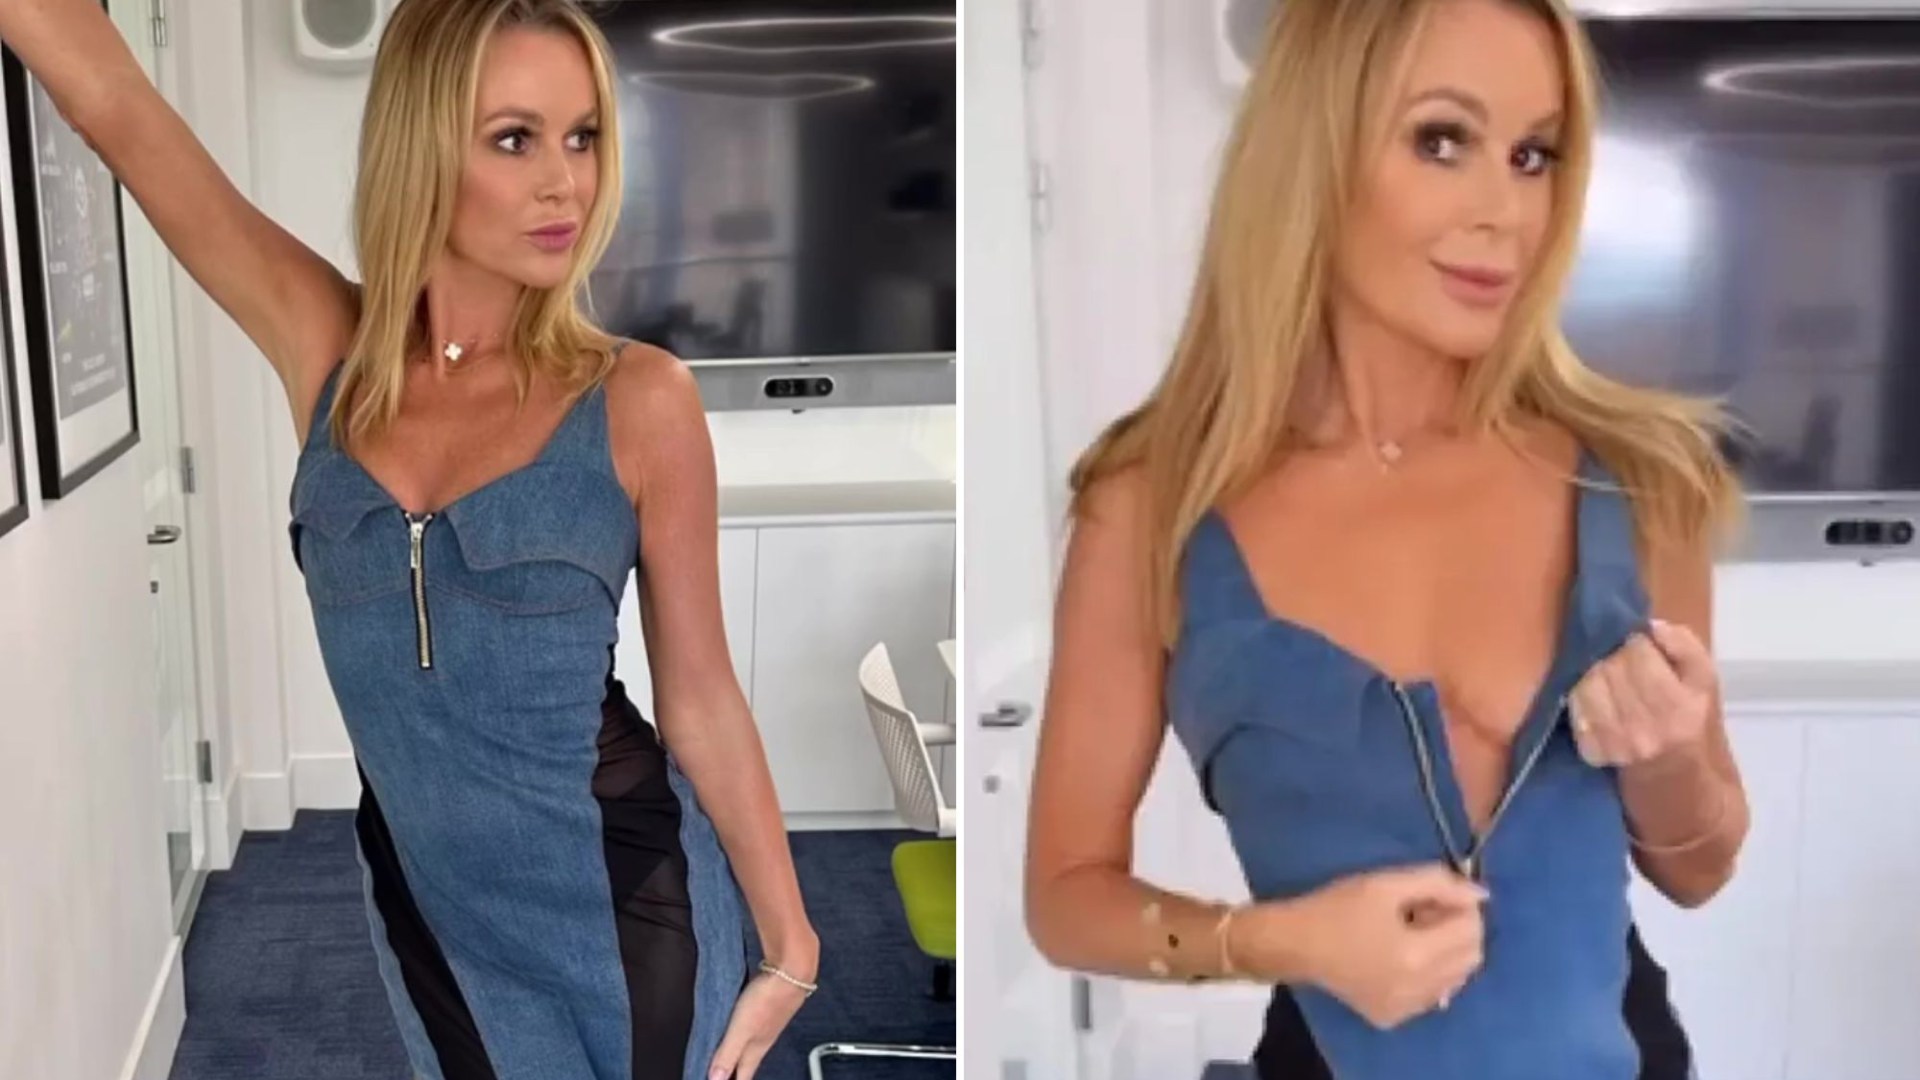 Flawless Amanda Holden stuns fans as she goes braless and flashes in denim outfit